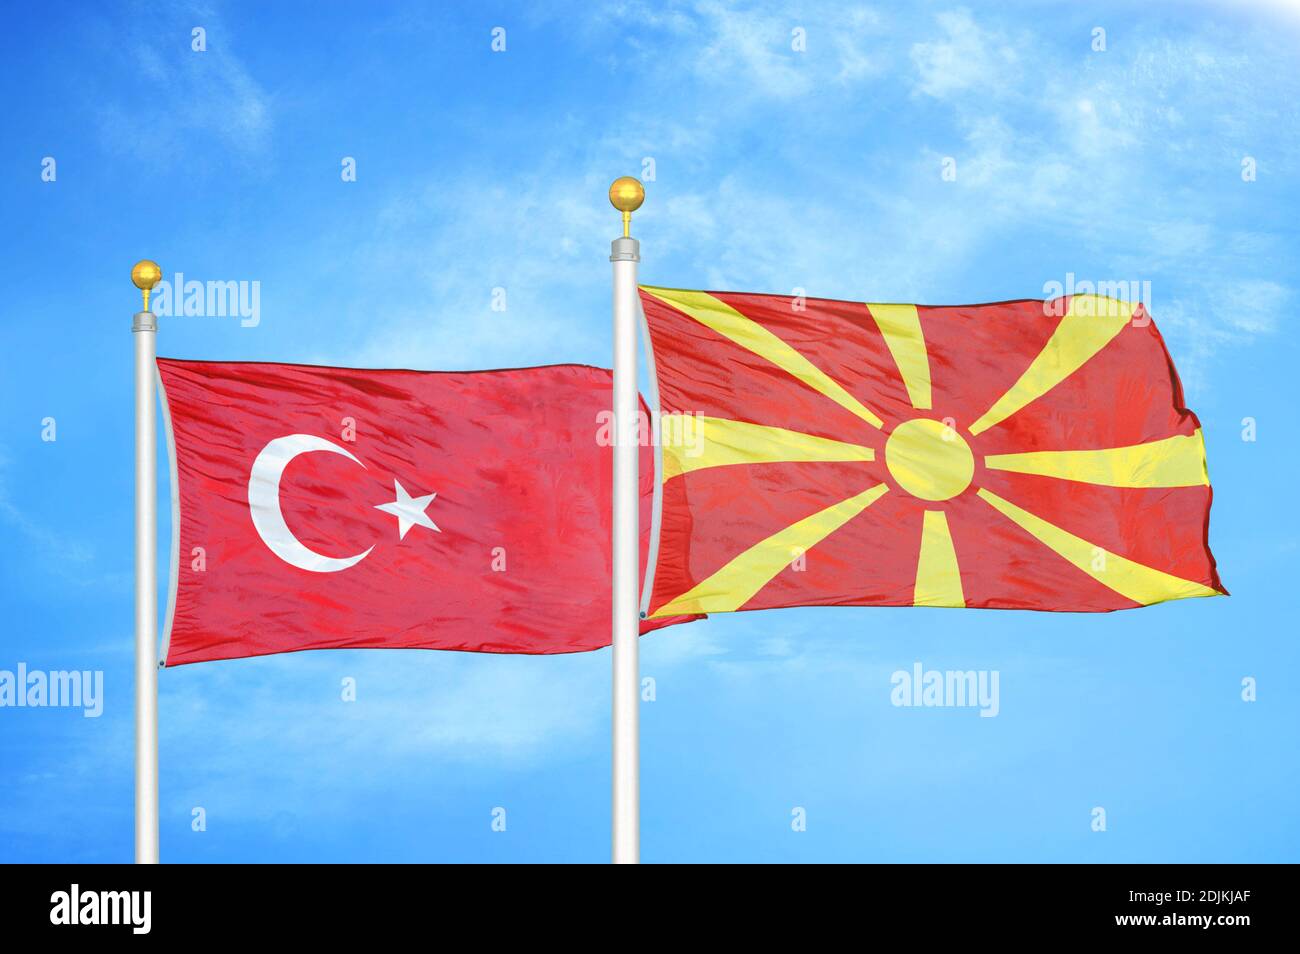 Turkey and North Macedonia two flags on flagpoles and blue cloudy sky Stock Photo